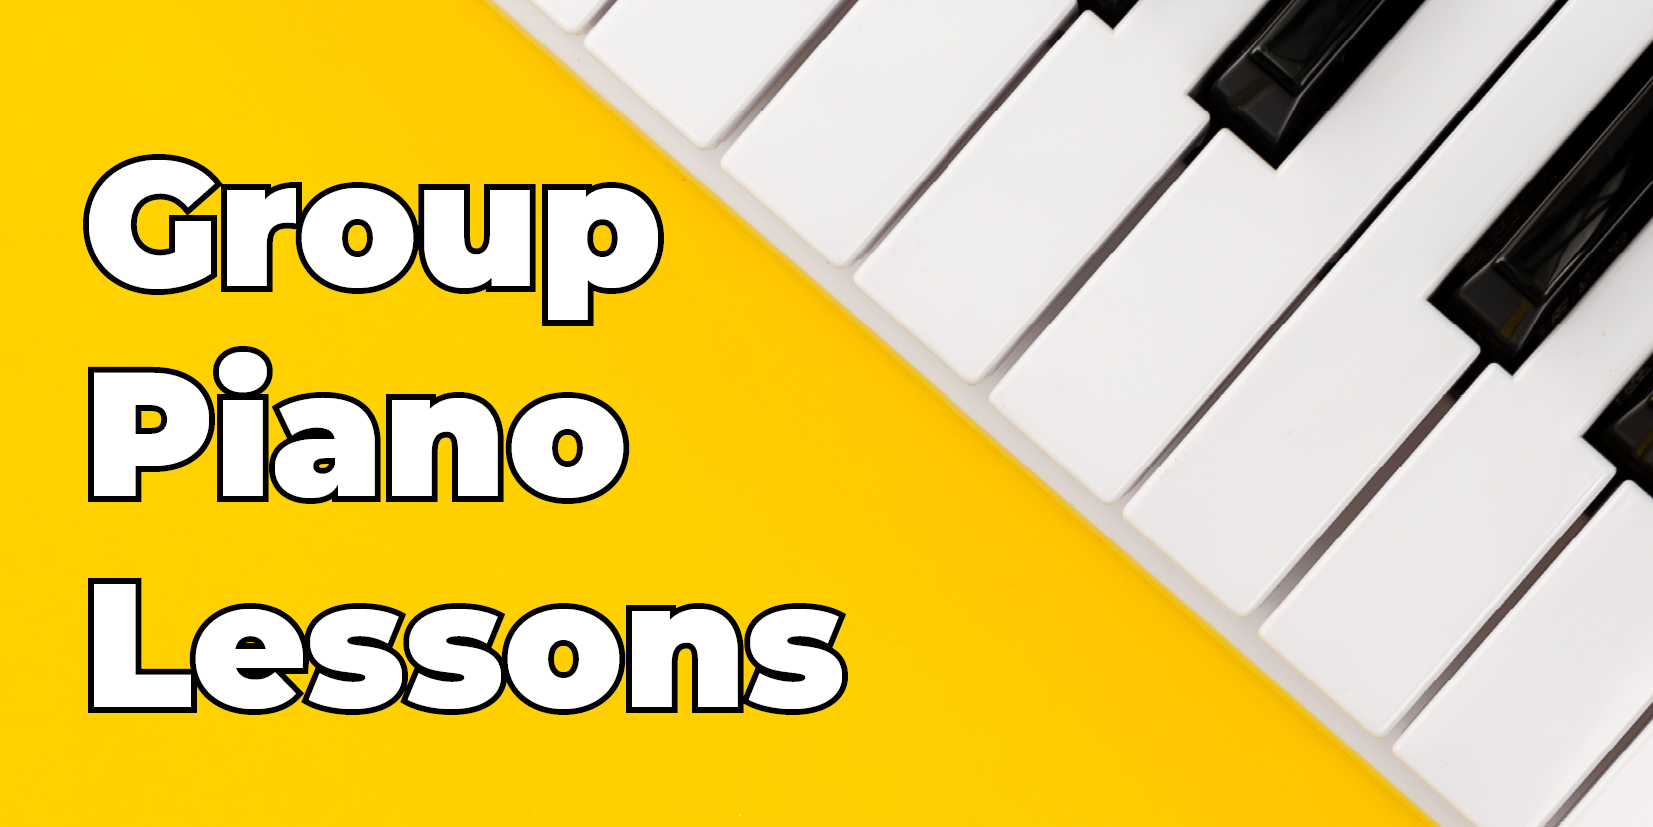 Group Piano Lessons